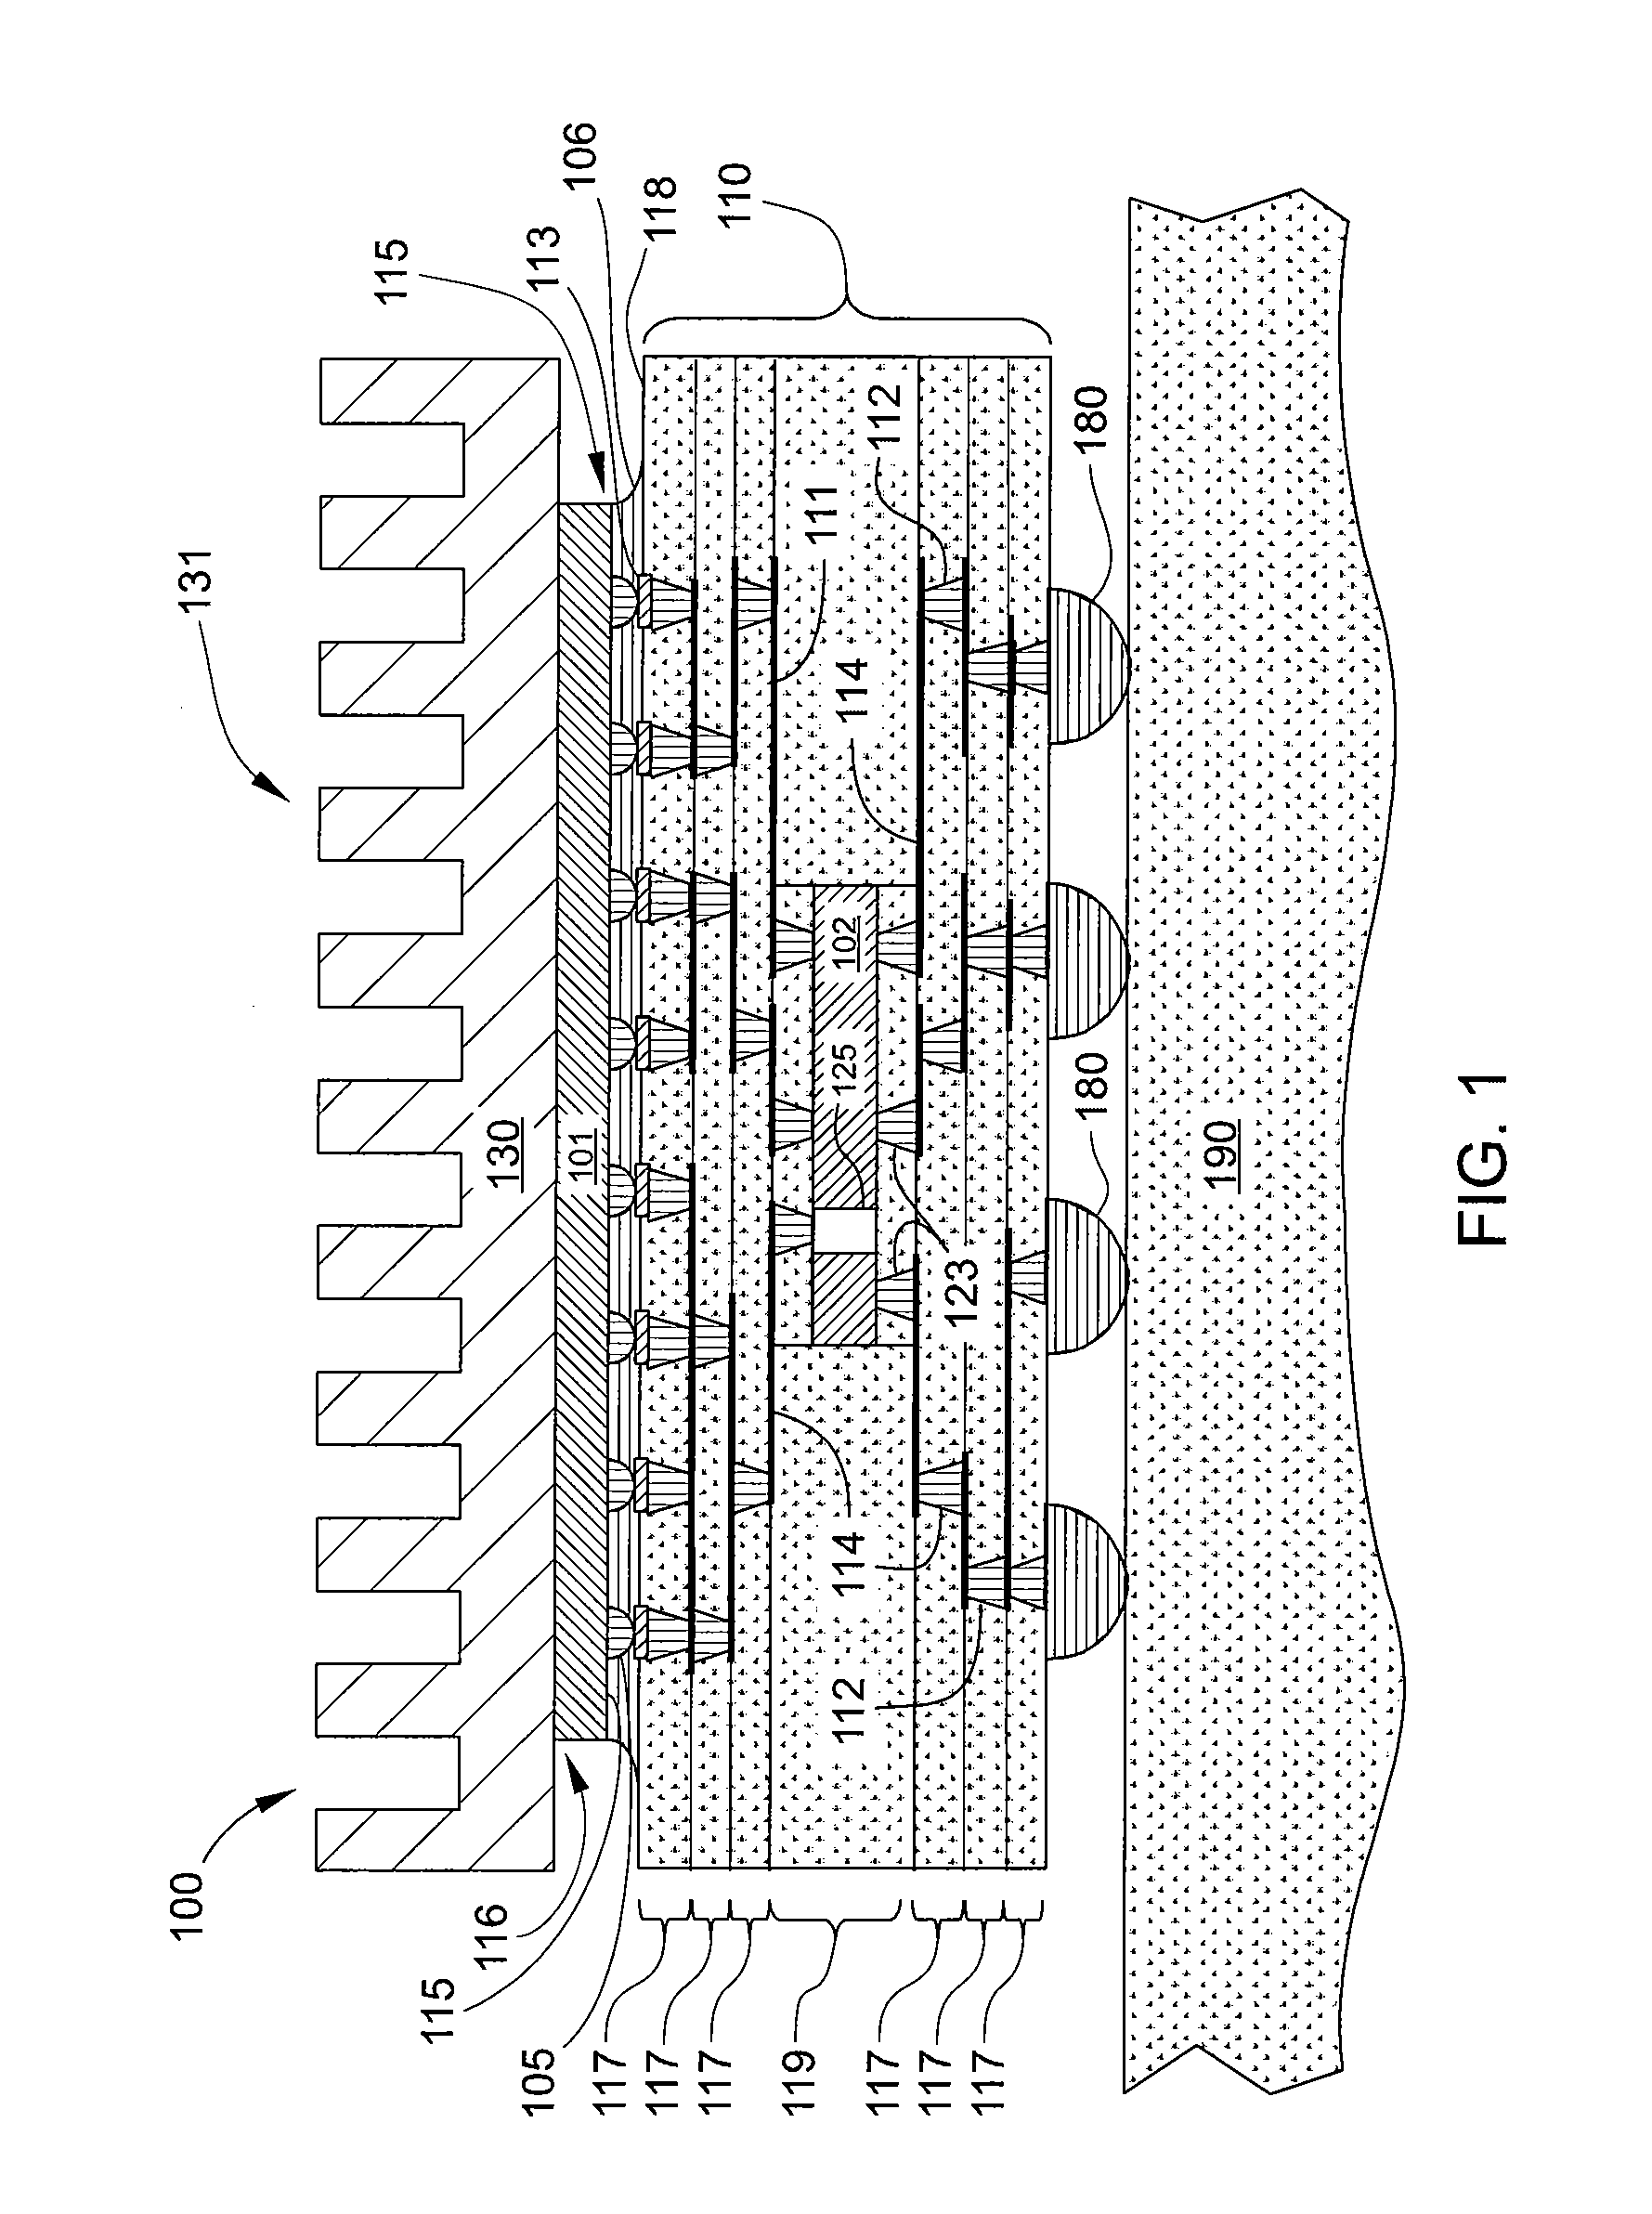 System with a high power chip and a low power chip having low interconnect parasitics